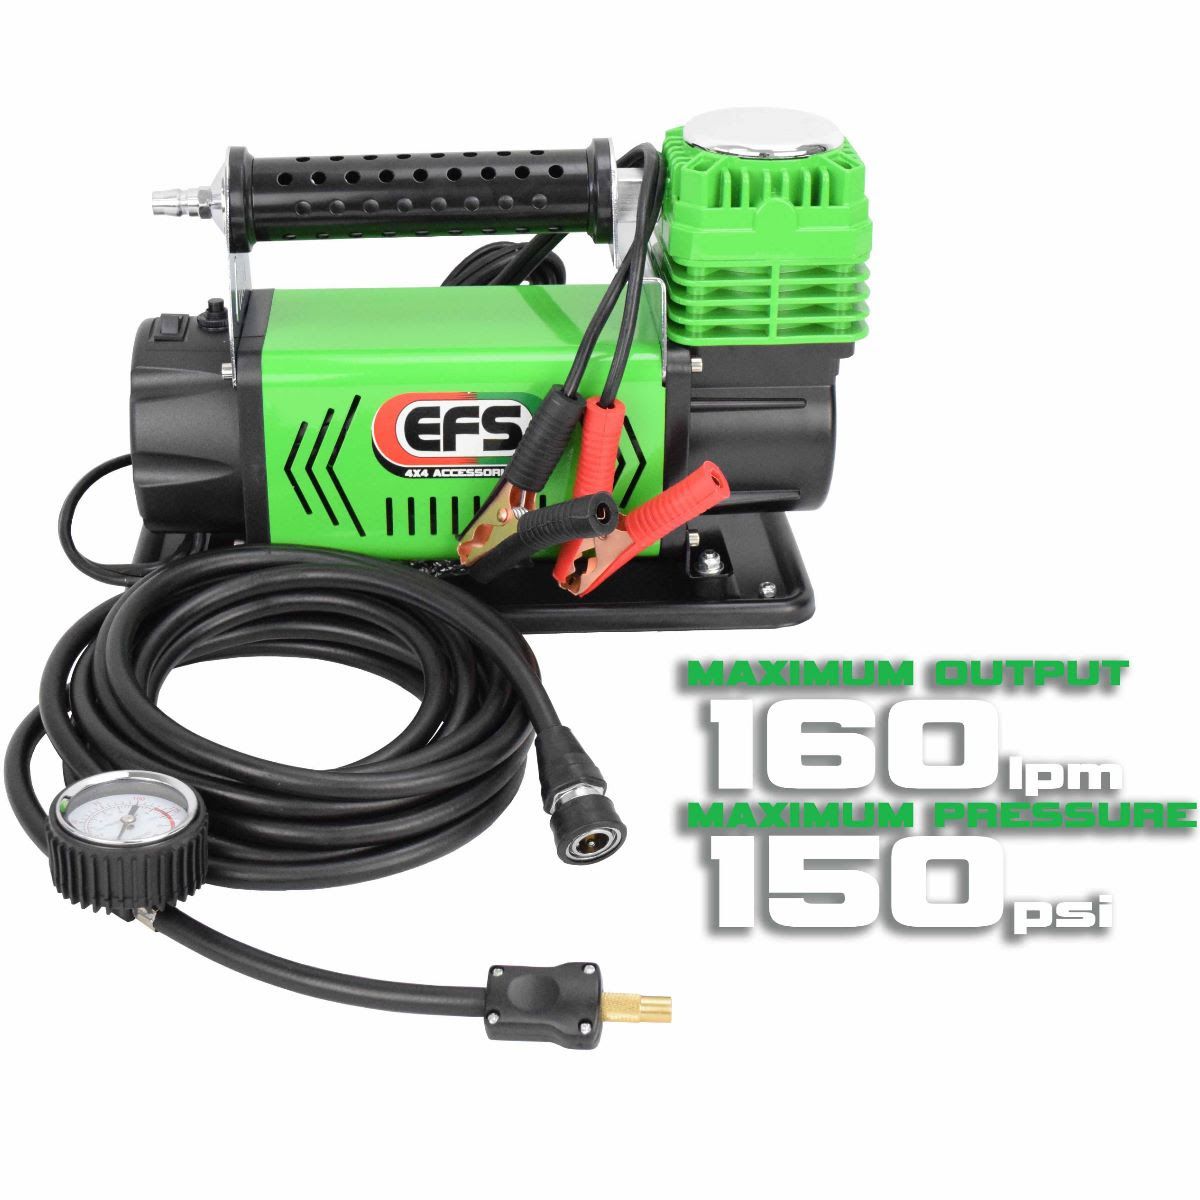 EFS Portable Air Compressor with 160 LPM output @ 30PSI